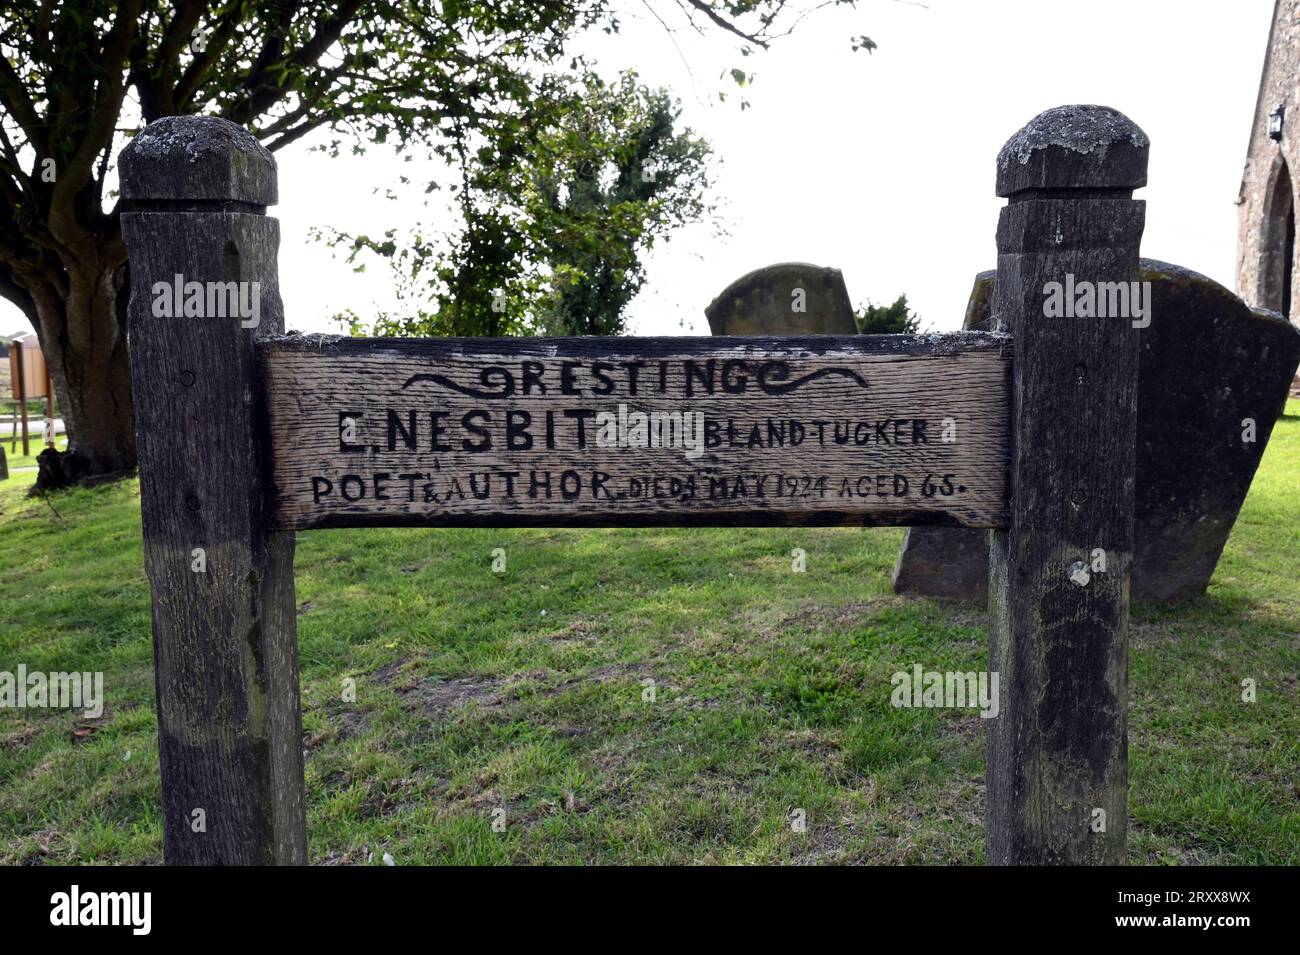 Memorial to the children's author E Nesbit. She died on 4th May 1924 aged 65 and is buried at the church of St Mary the Virgin, St Mary in the Marsh. Stock Photo